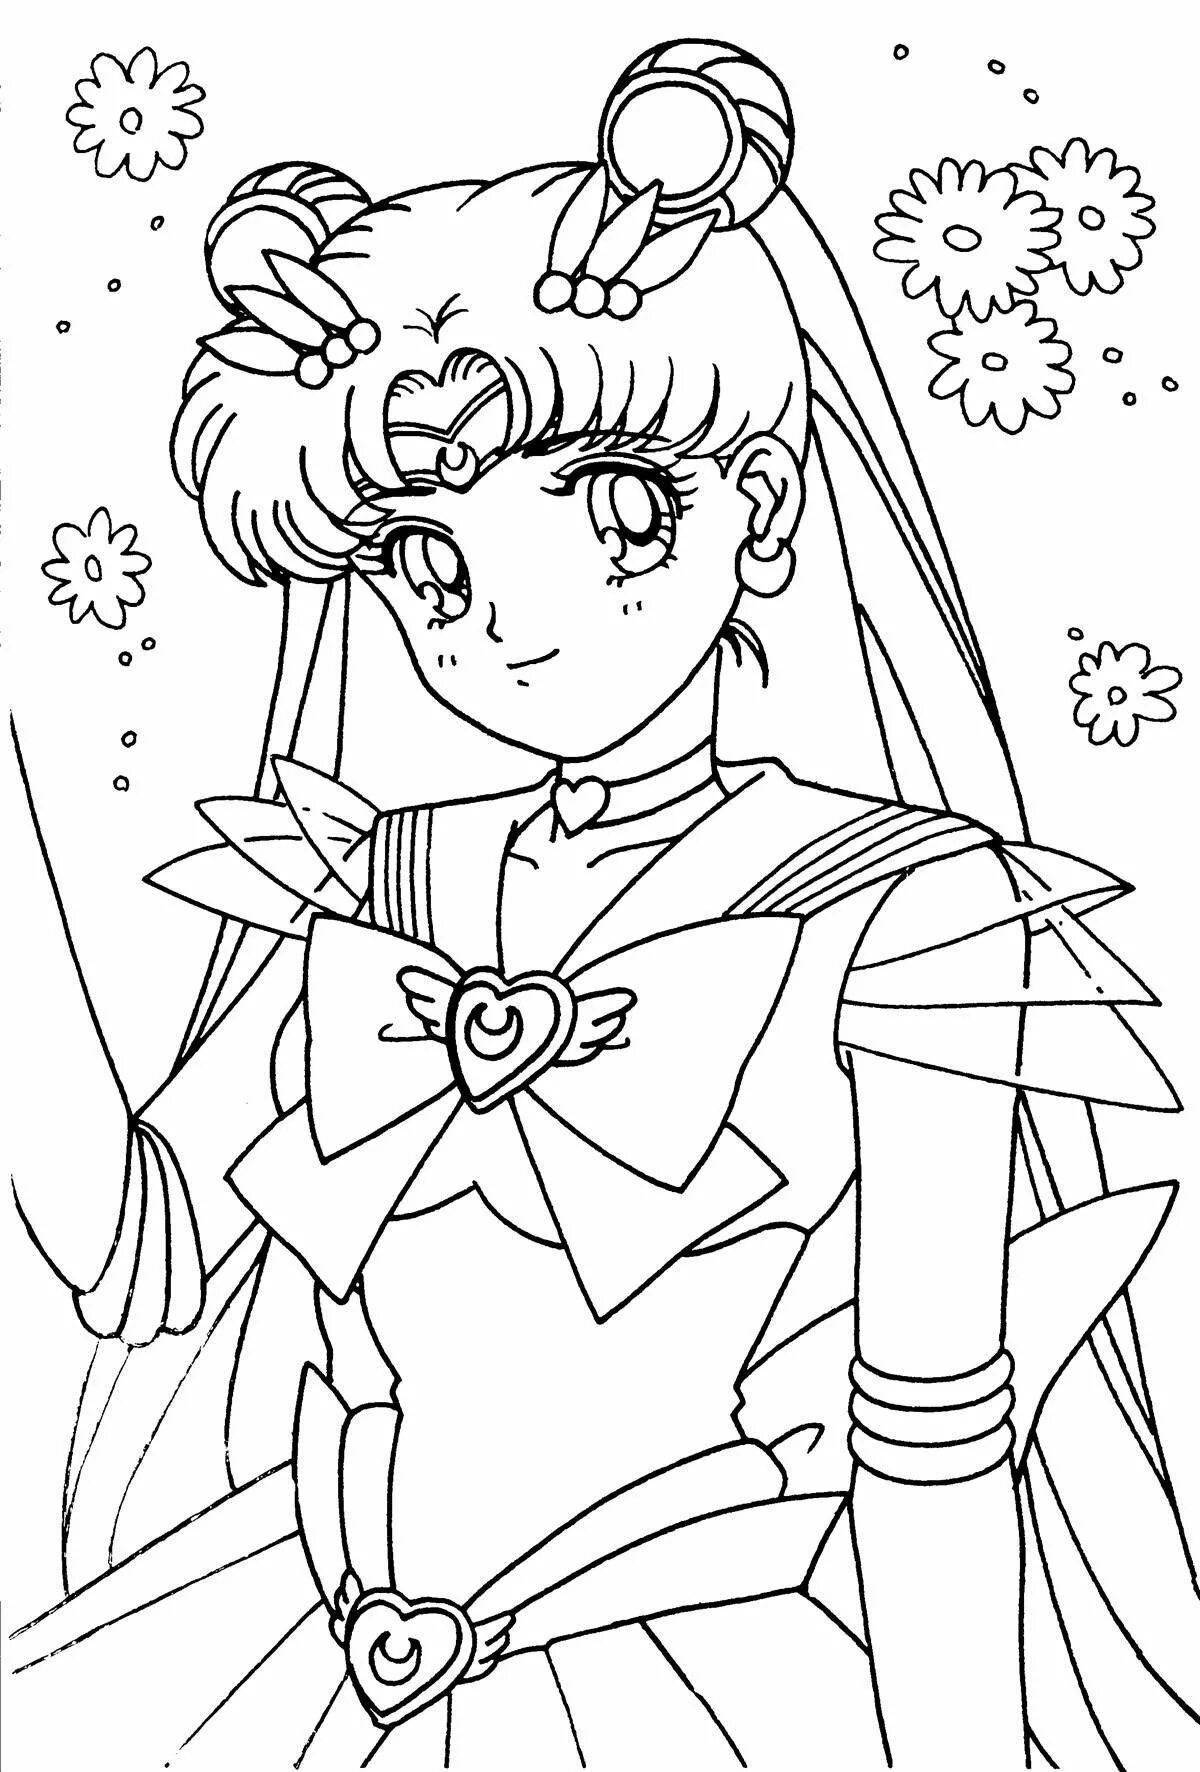 Playful coloring book for girls sailor moon